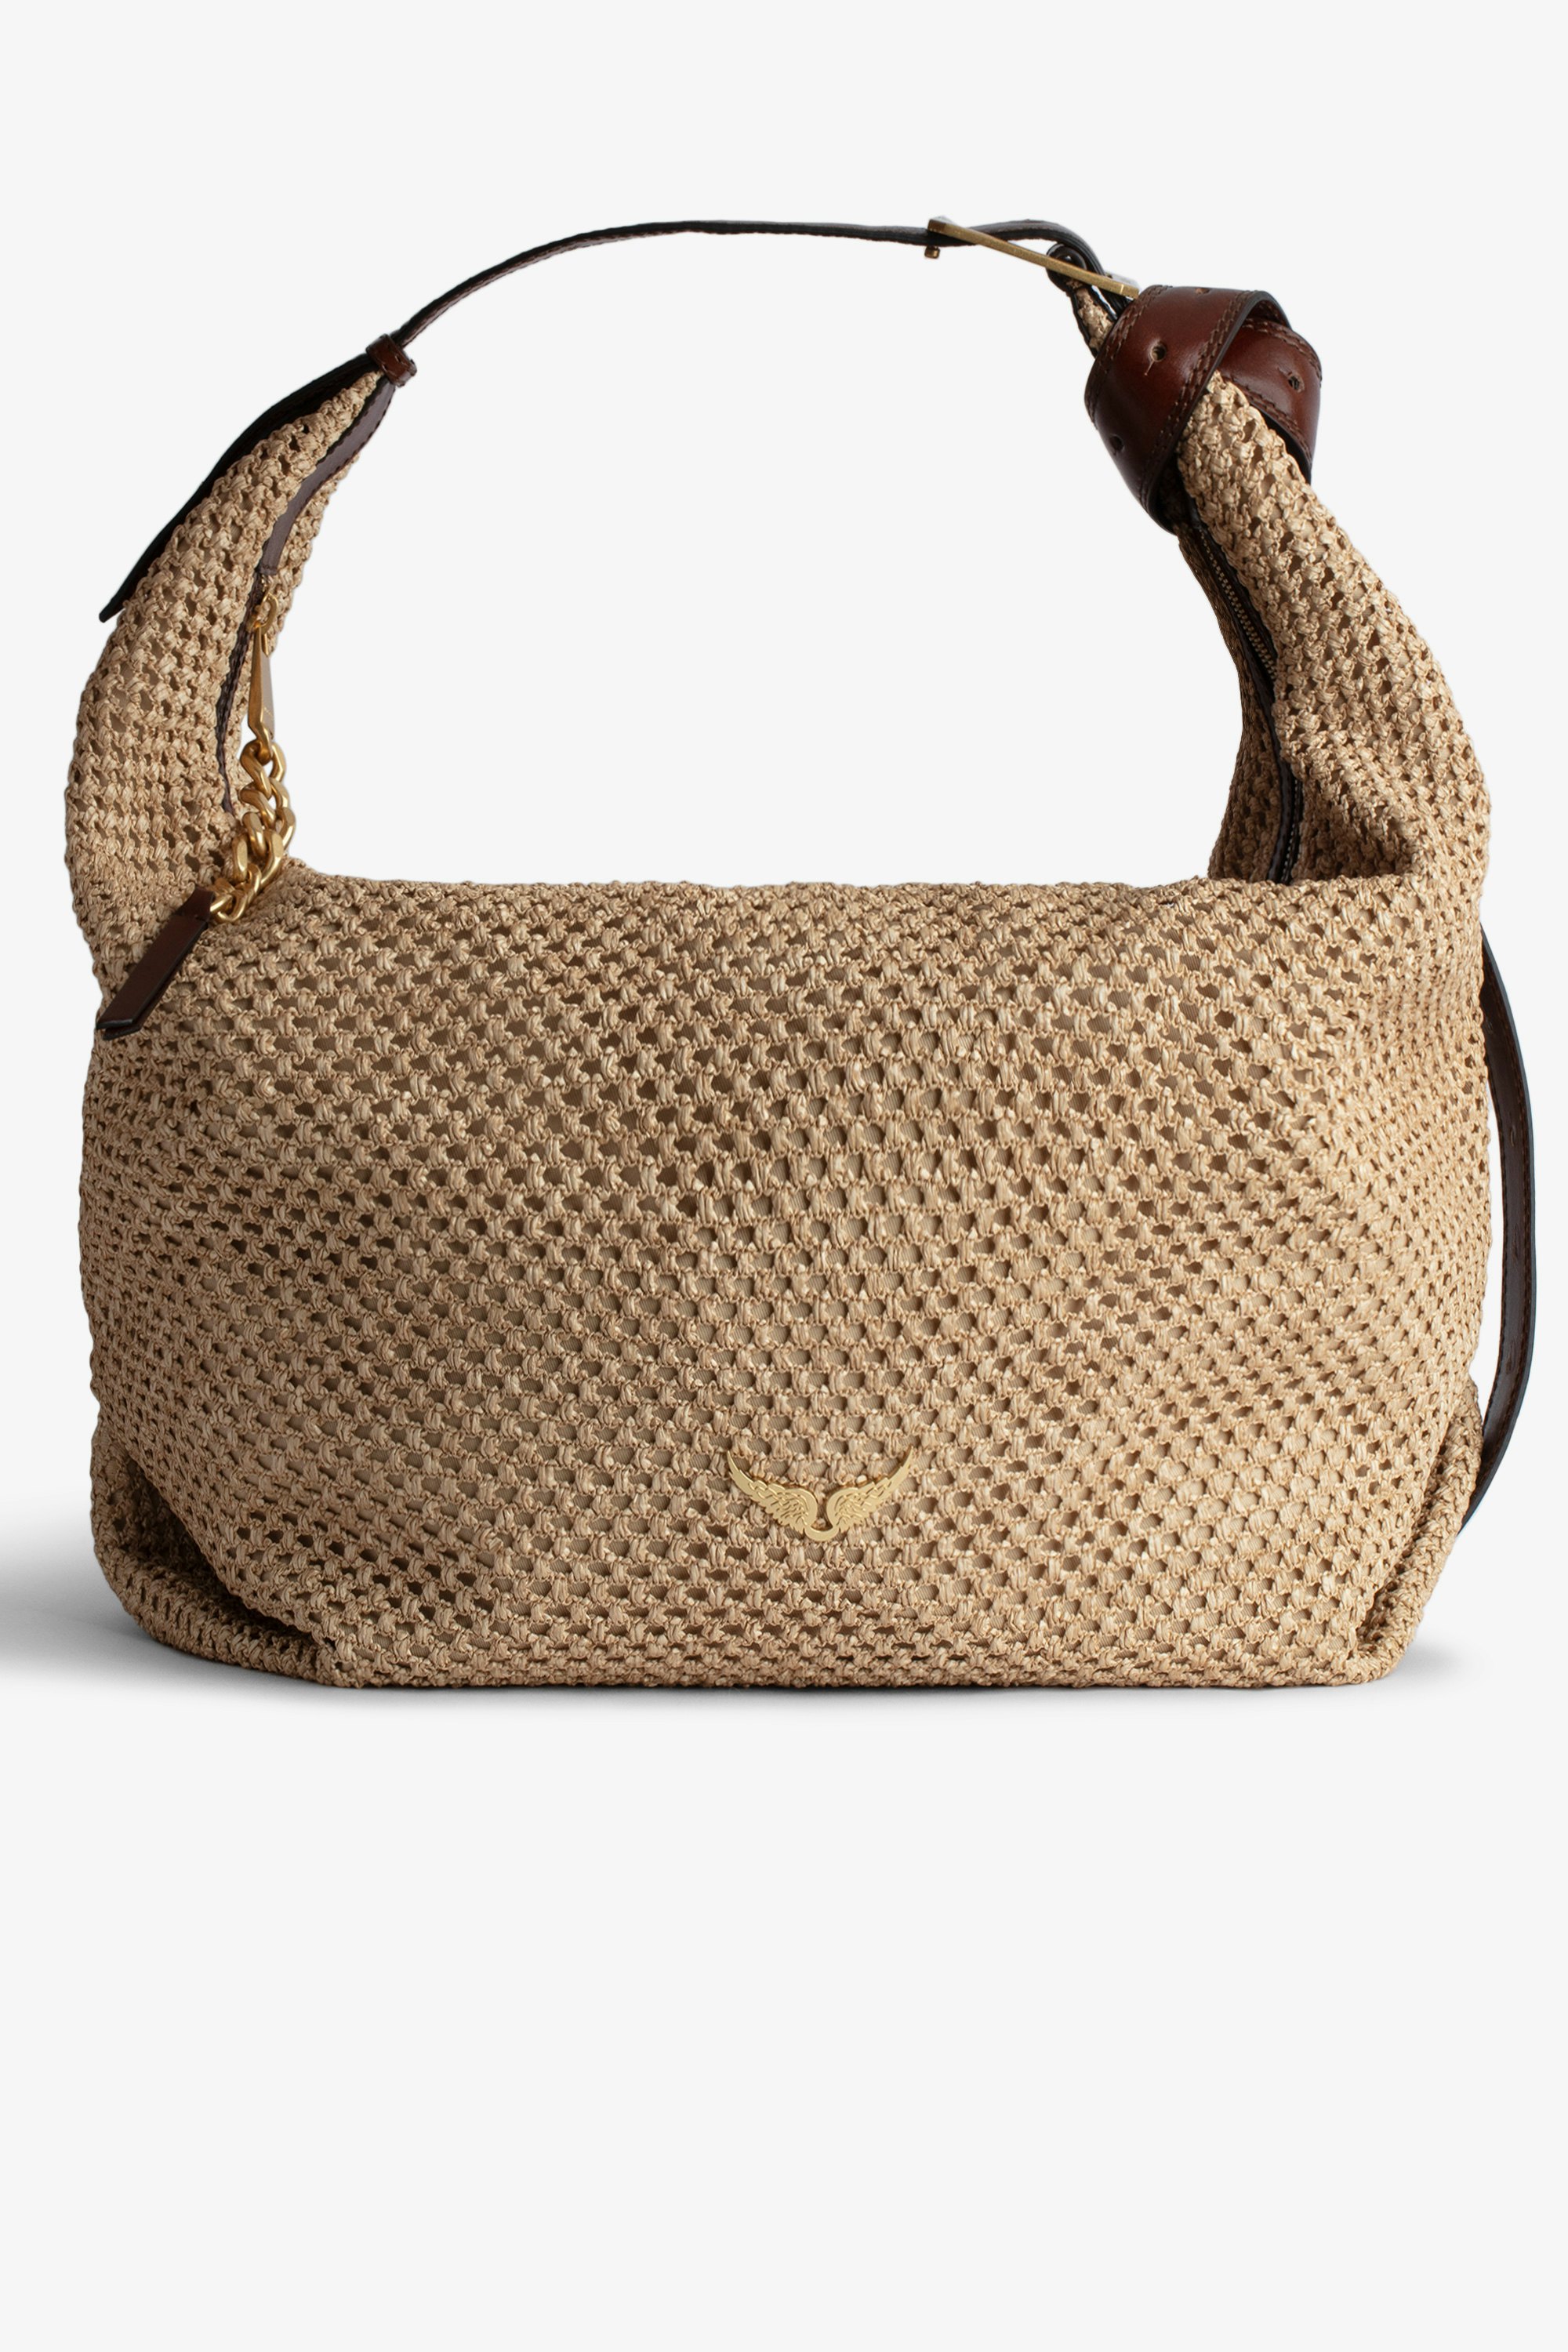 Le Cecilia XL - Large beige basket-style bag with leather shoulder strap and metallic C buckle.